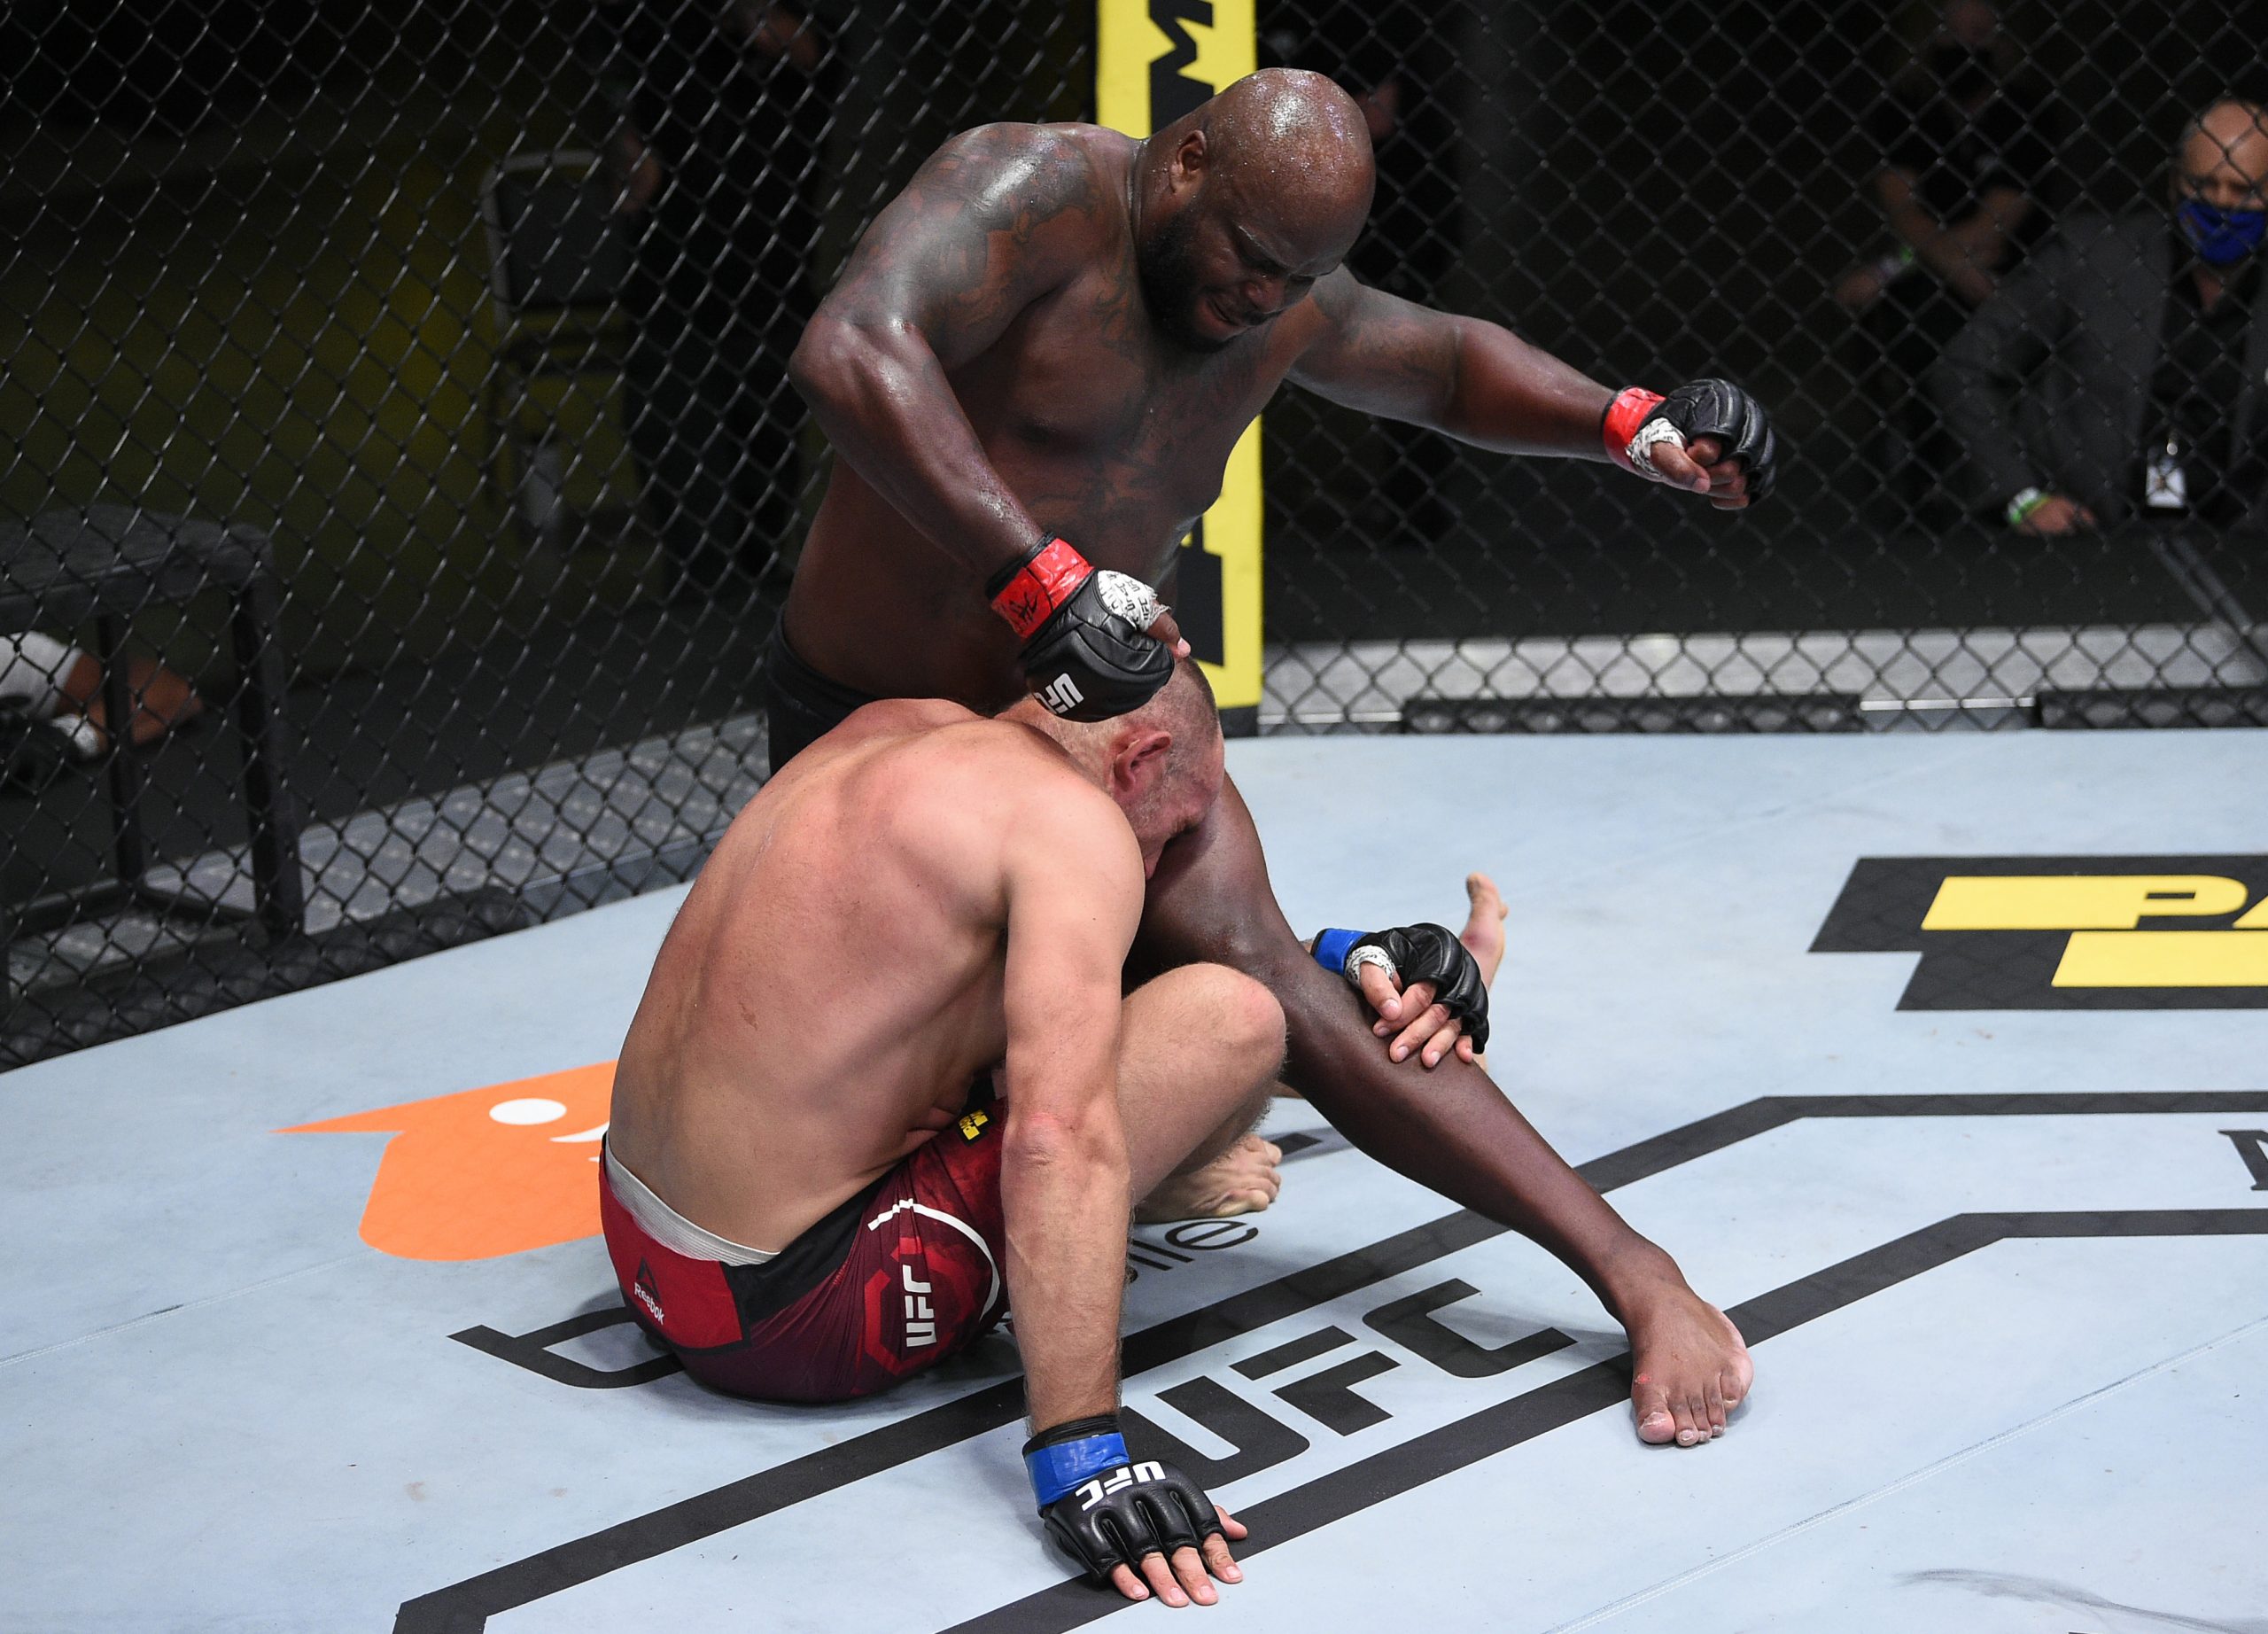 Derrick Lewis holds the most knockouts in UFC Heavyweight history